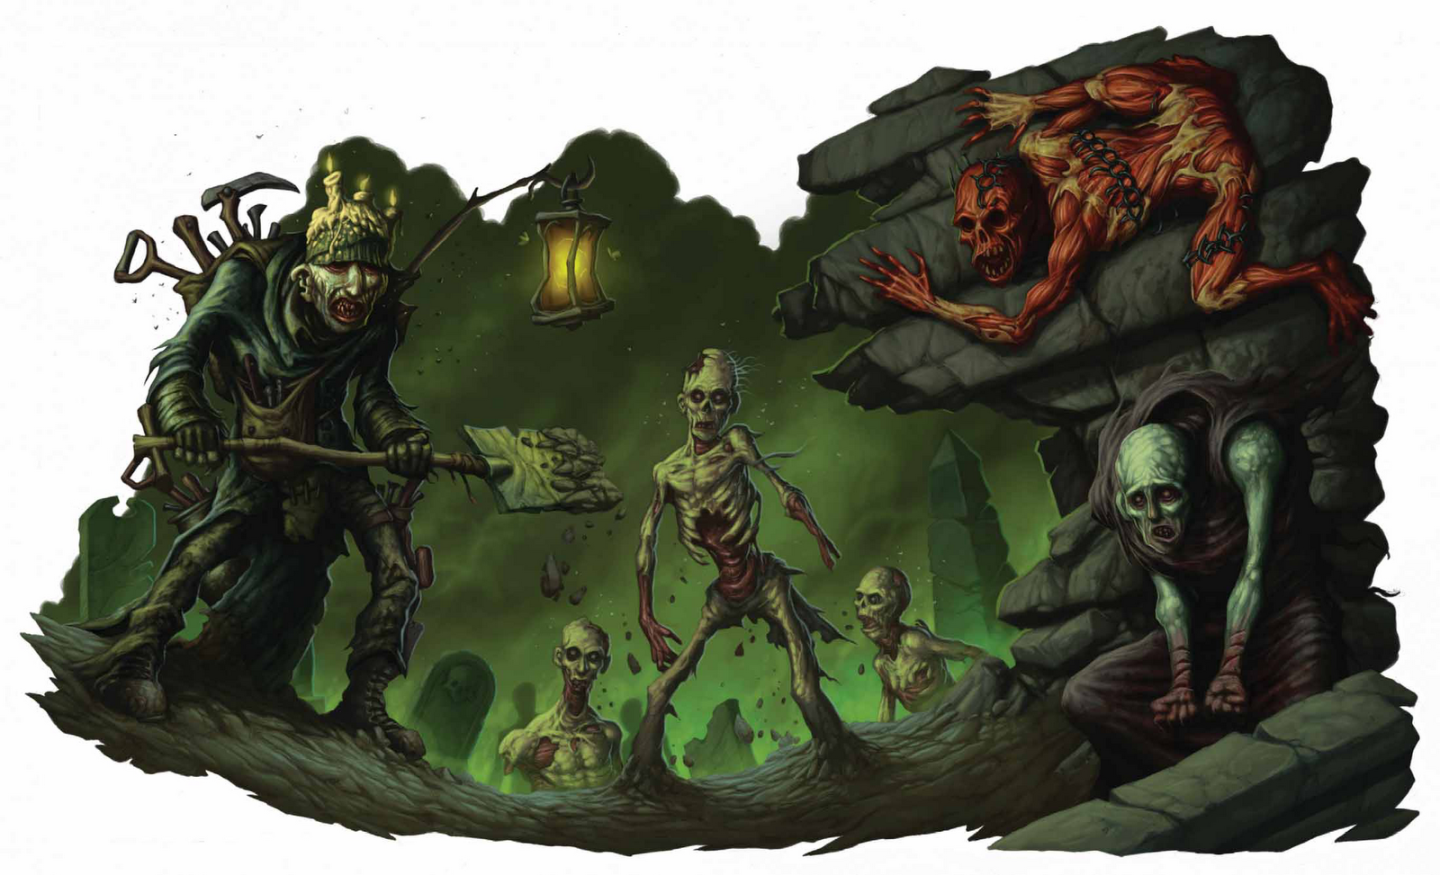 Favorite 5e Monsters Countdown - #19: Zombies.